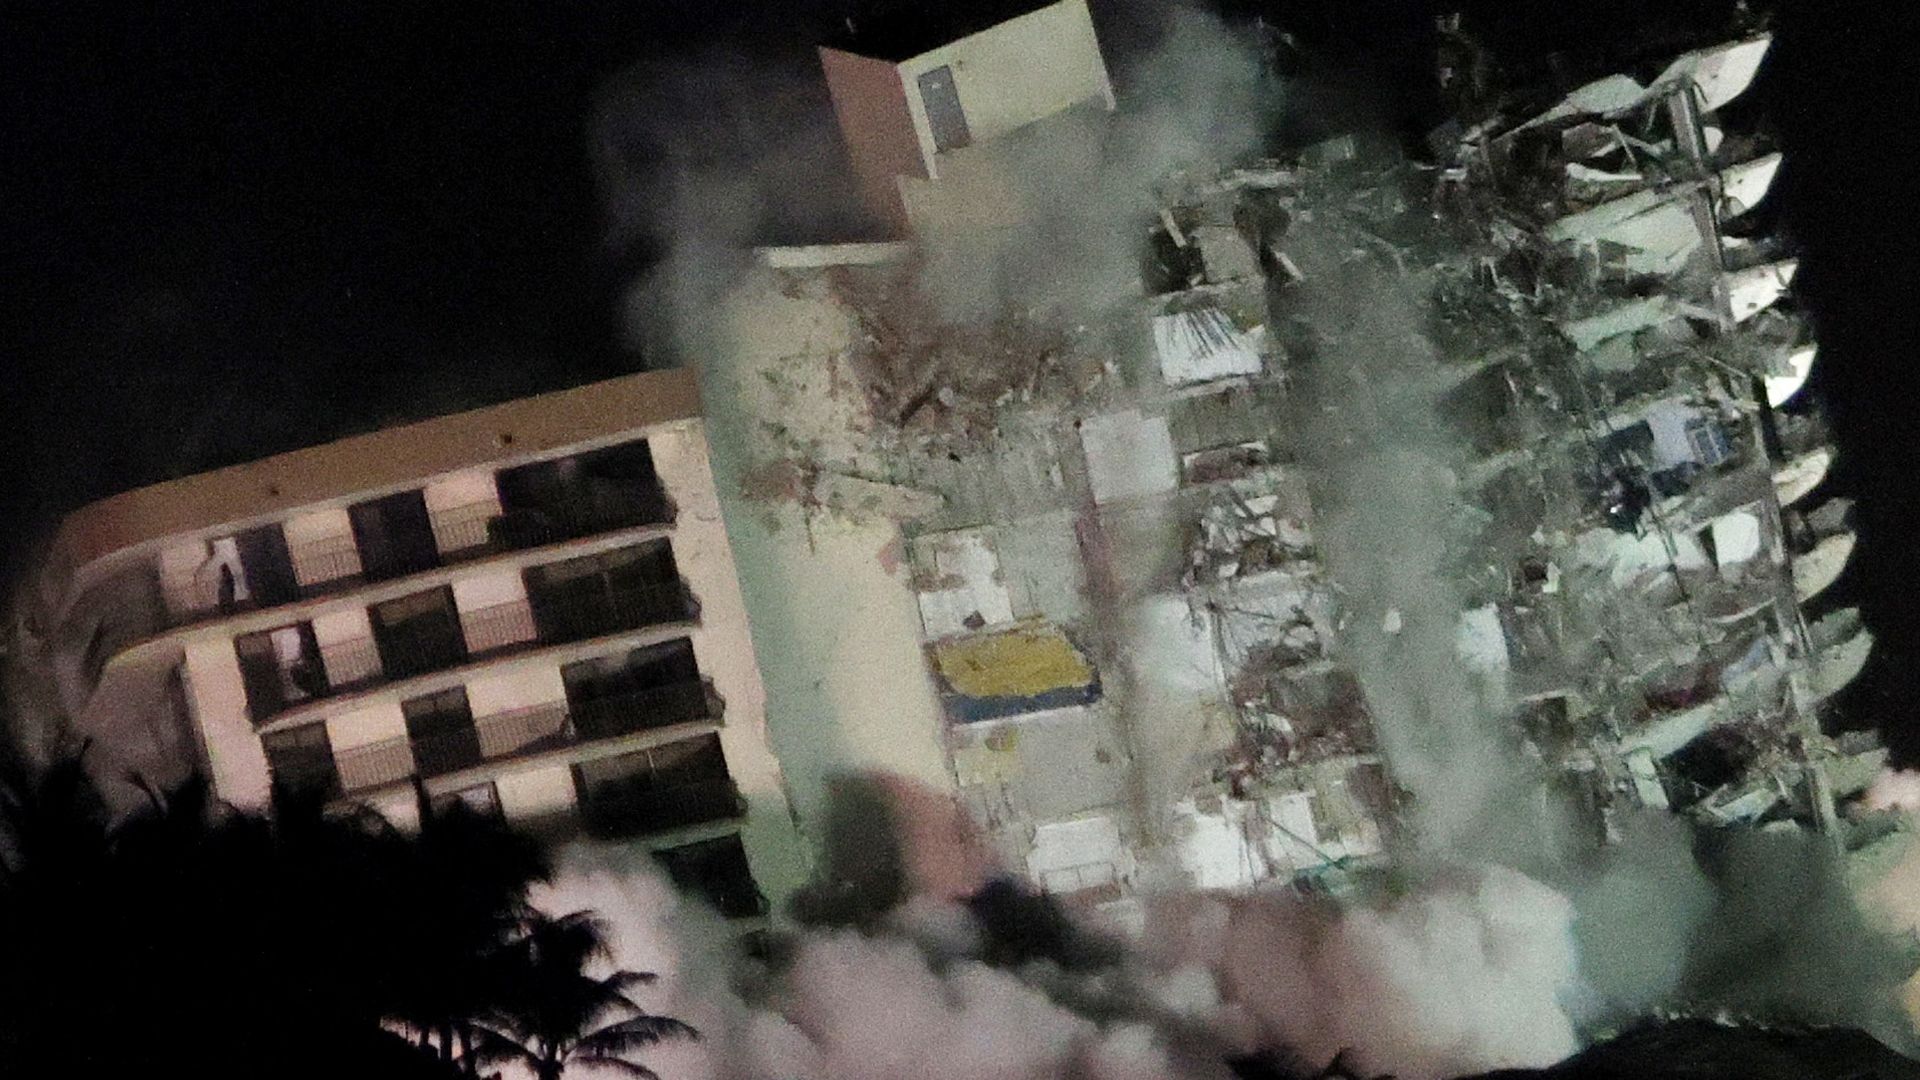 The remaining part of the partially collapsed 12-story Champlain Towers South condo building falls with a controlled demolition on July 4, 2021 in Surfside, Florida.